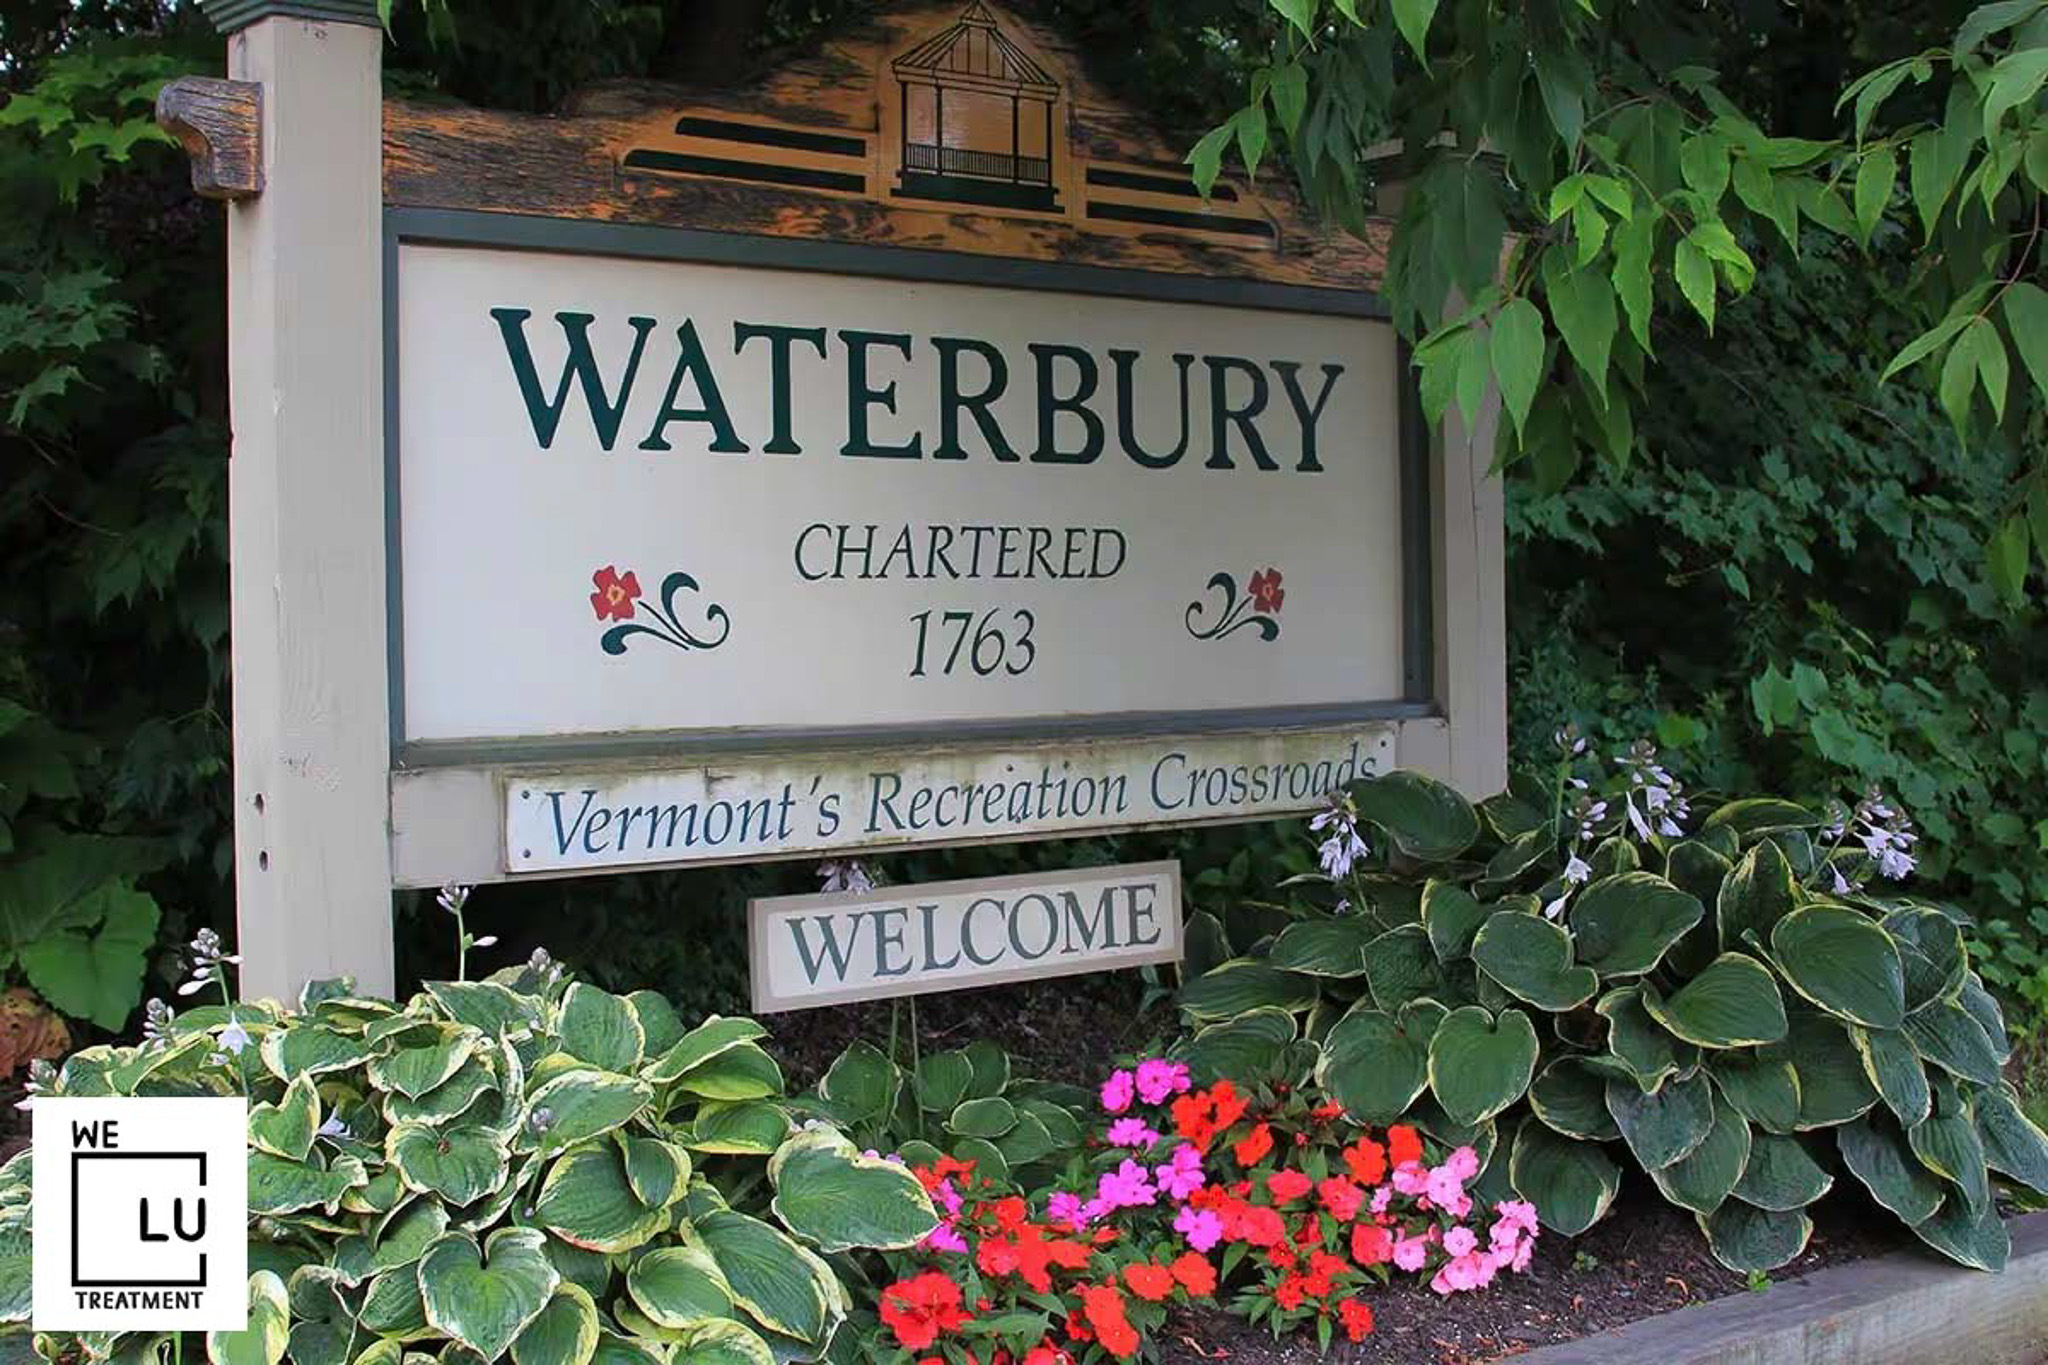 Waterbury CT We Level Up treatment center for drug and alcohol rehab detox and mental health services - Image 1